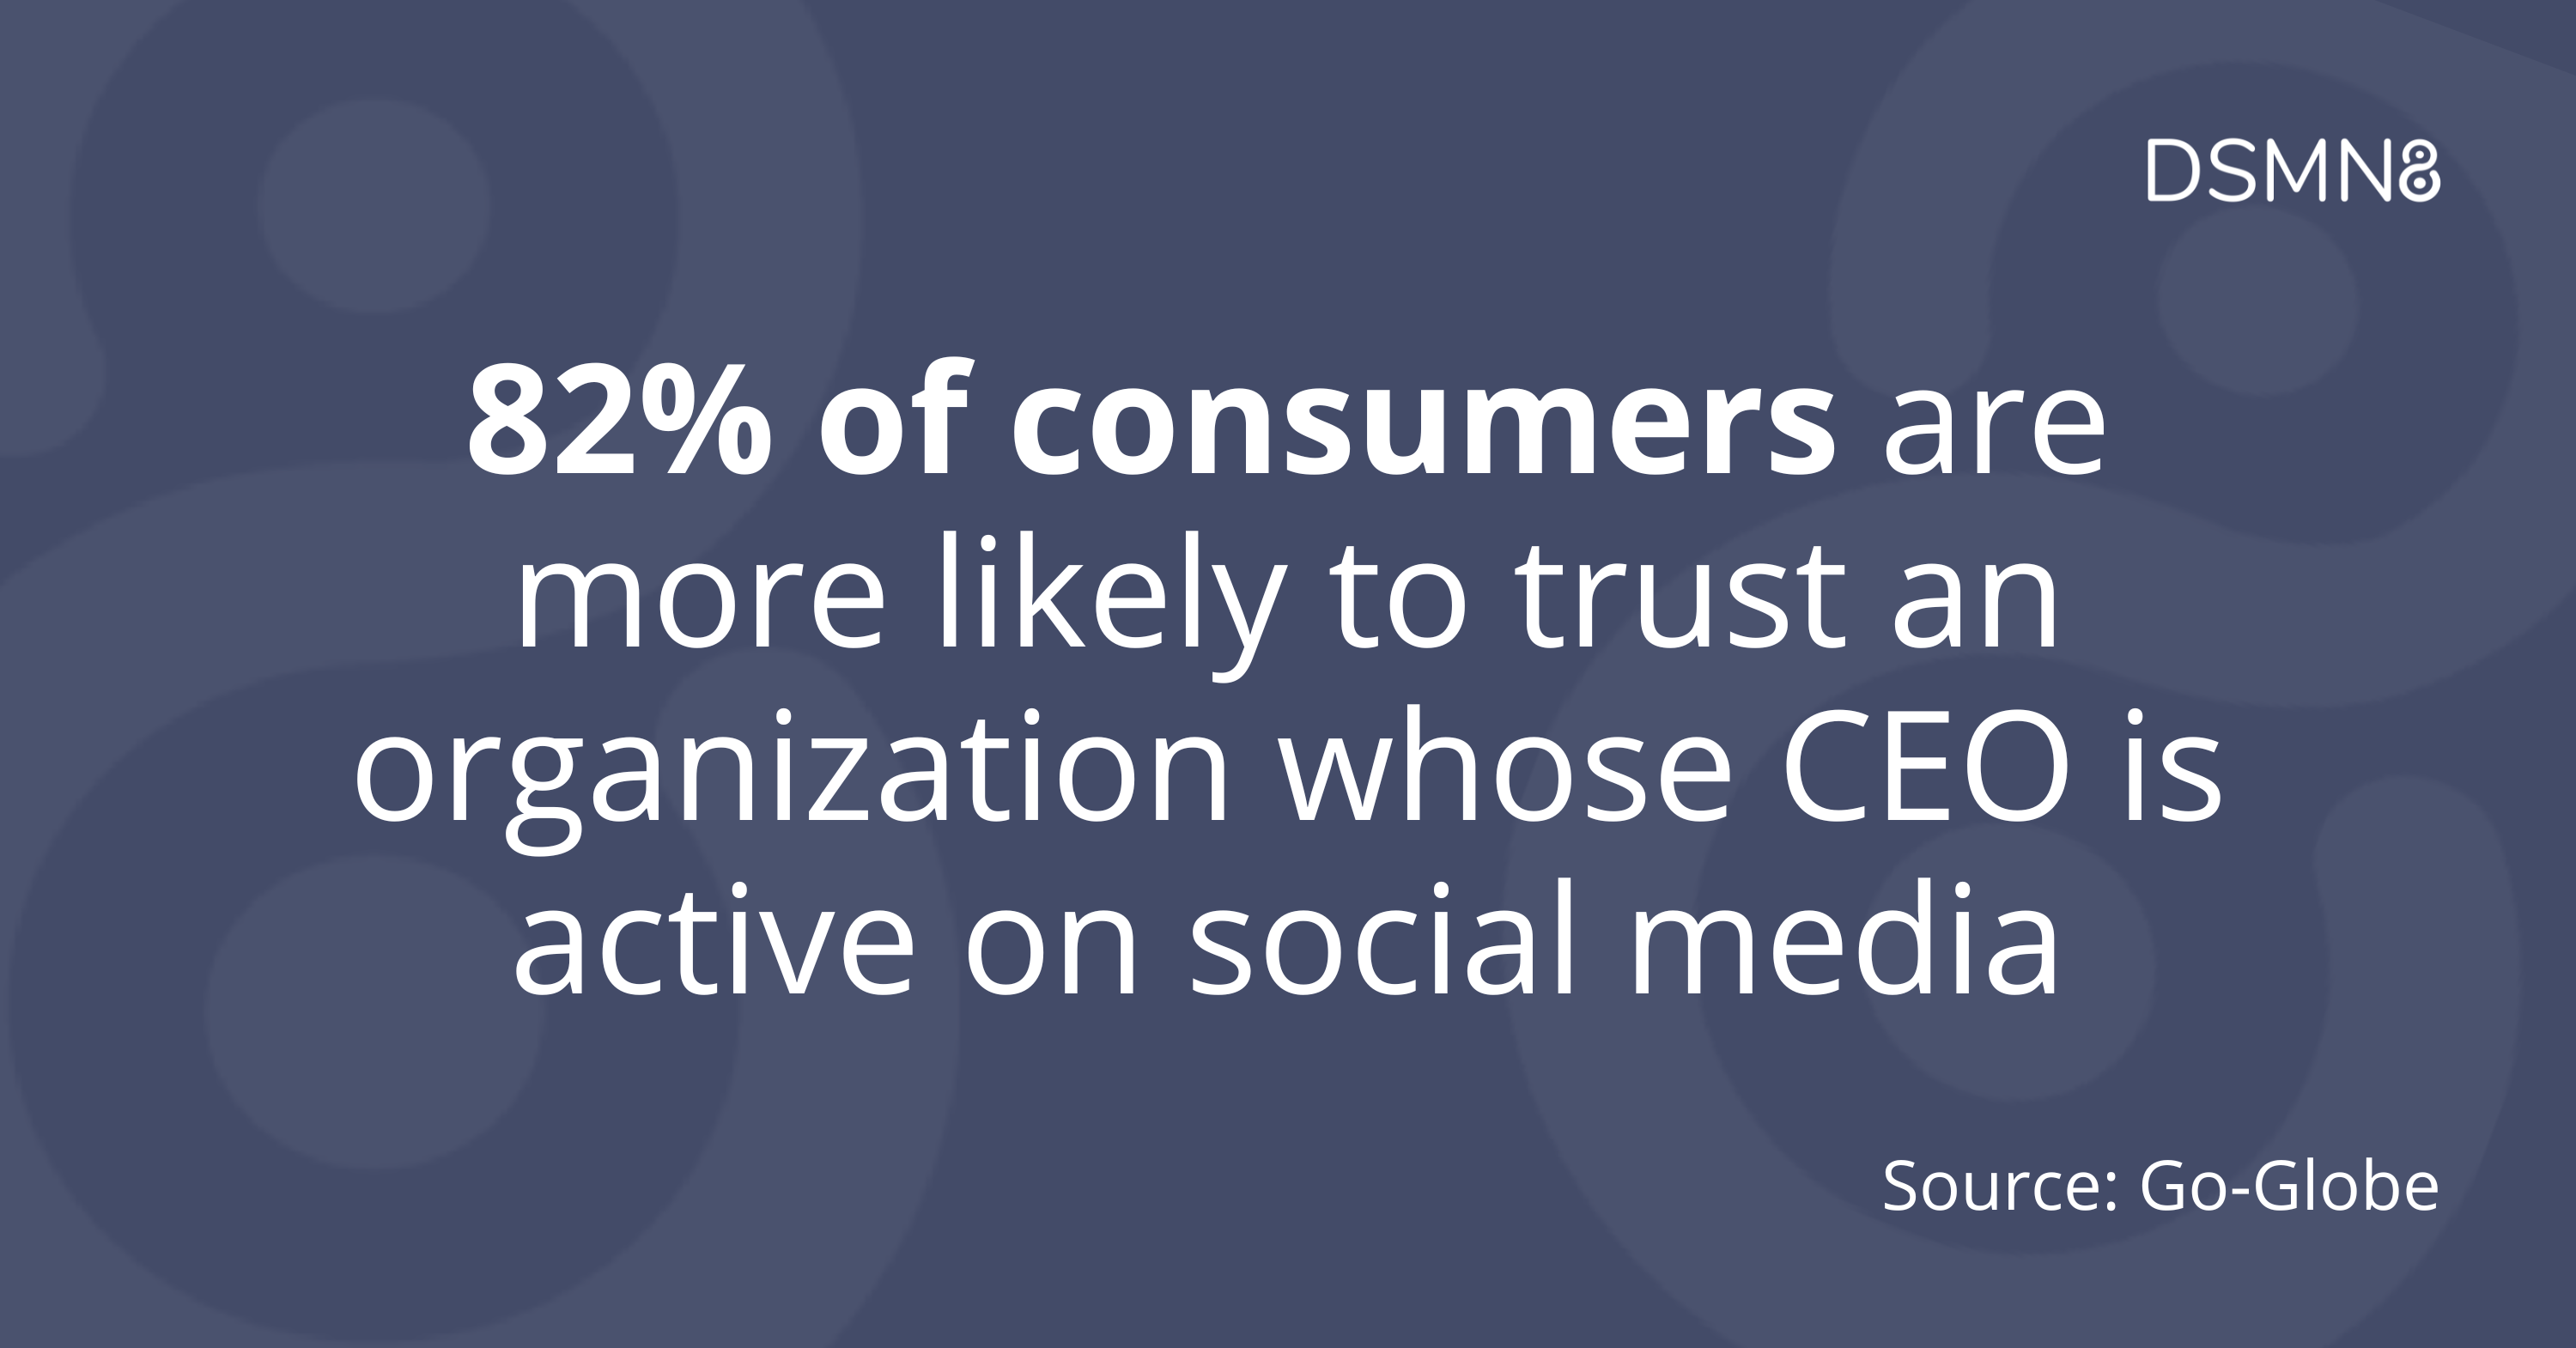 82% of consumers are more likely to trust an organization whose CEO is active on social media